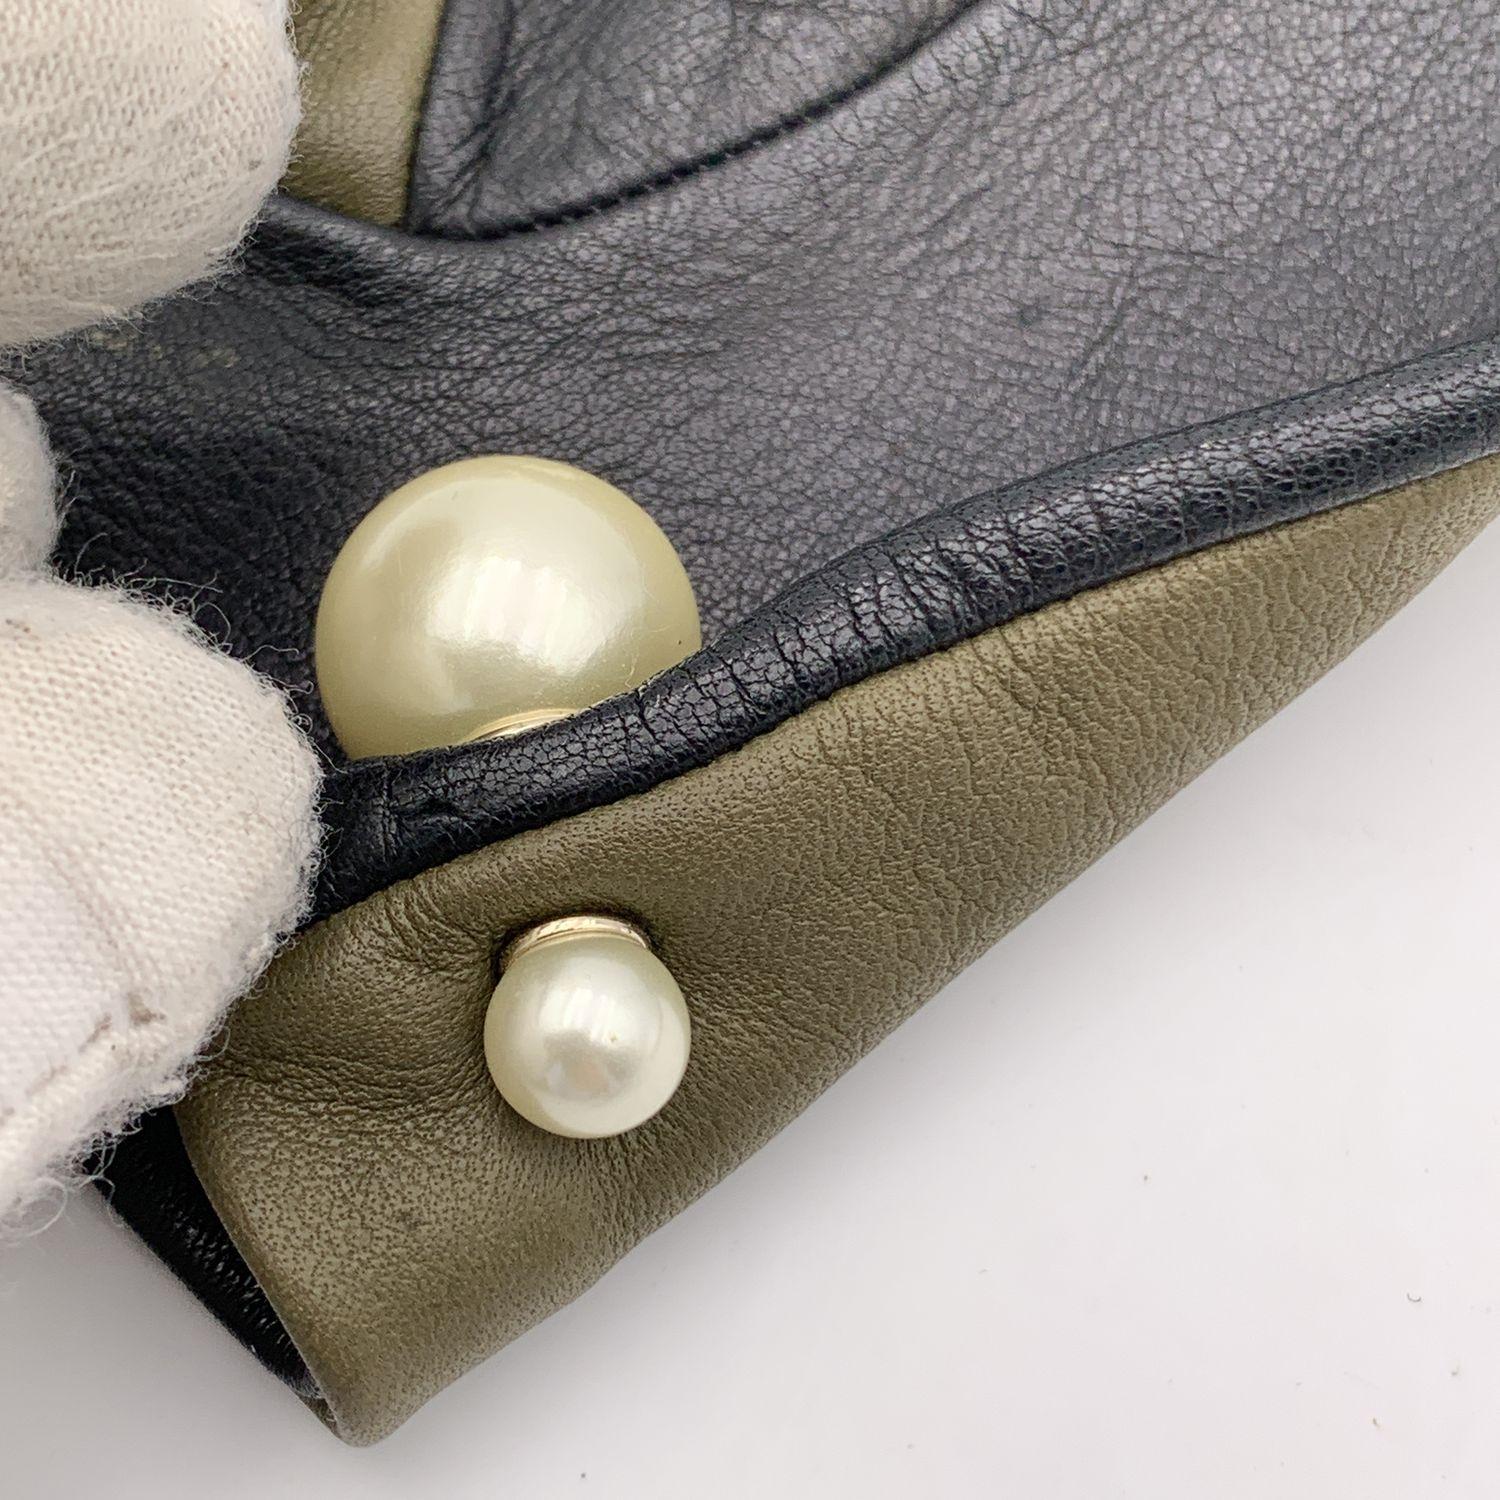 Christian Dior Green and Black Leather Tribales Pearl Gloves Size 7.5 1